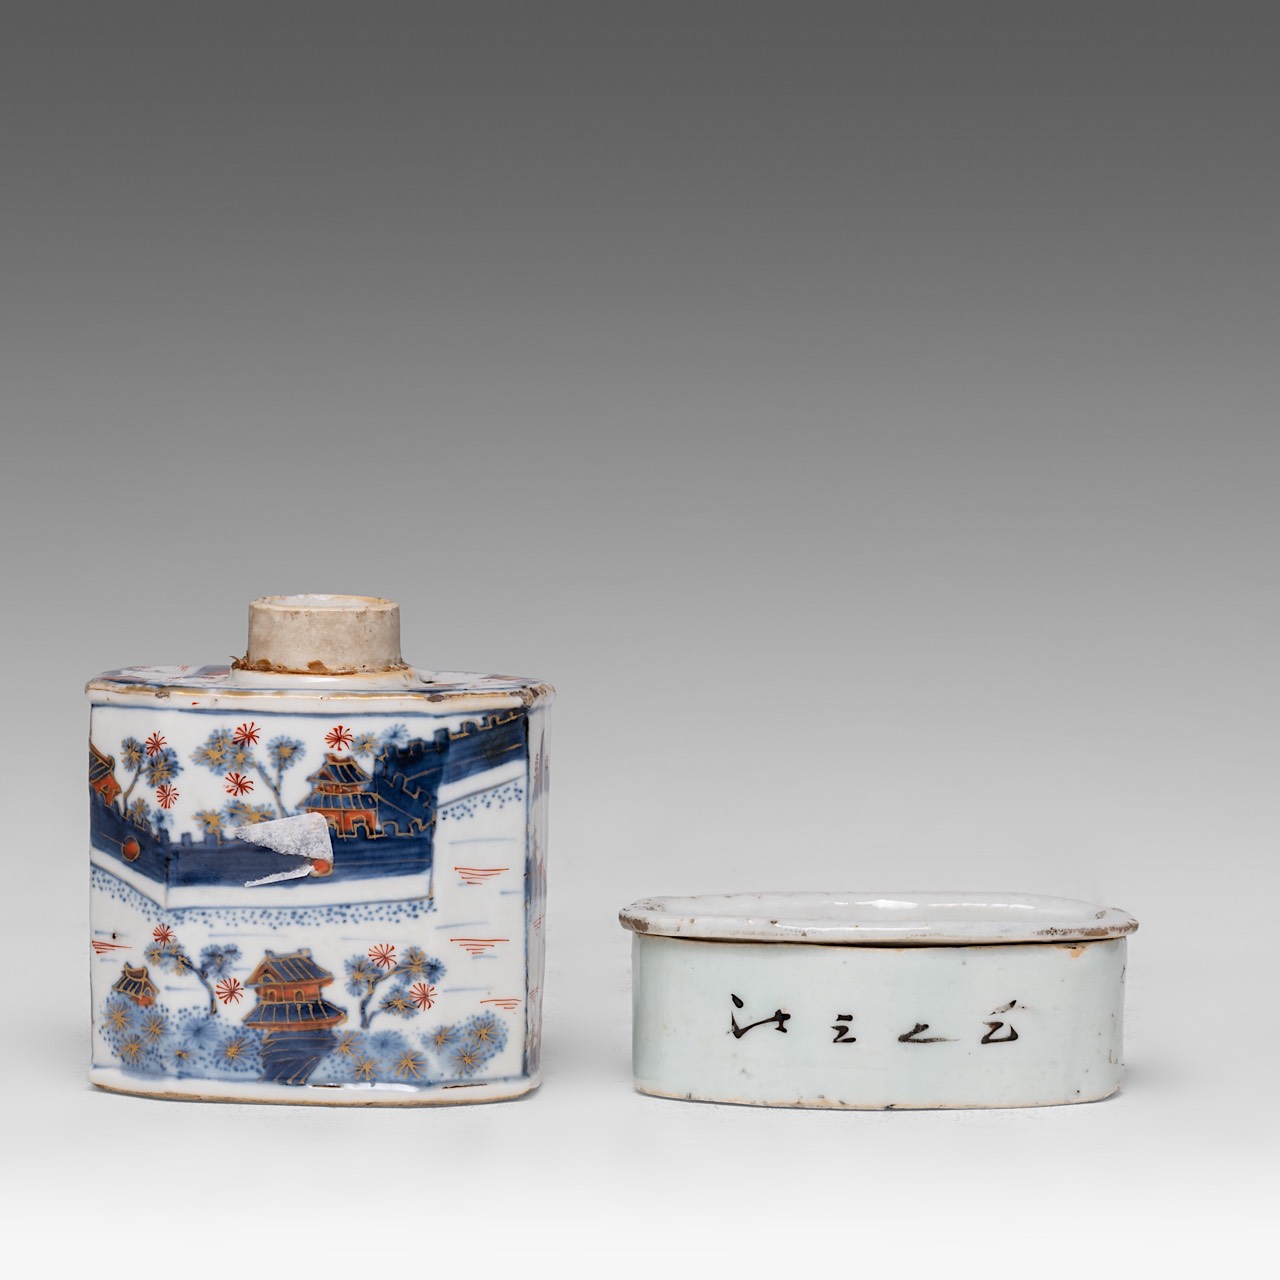 A collection of four Chinese scholar's objects, incl. a brush pot with inscriptions, late 18thC - ad - Image 21 of 29